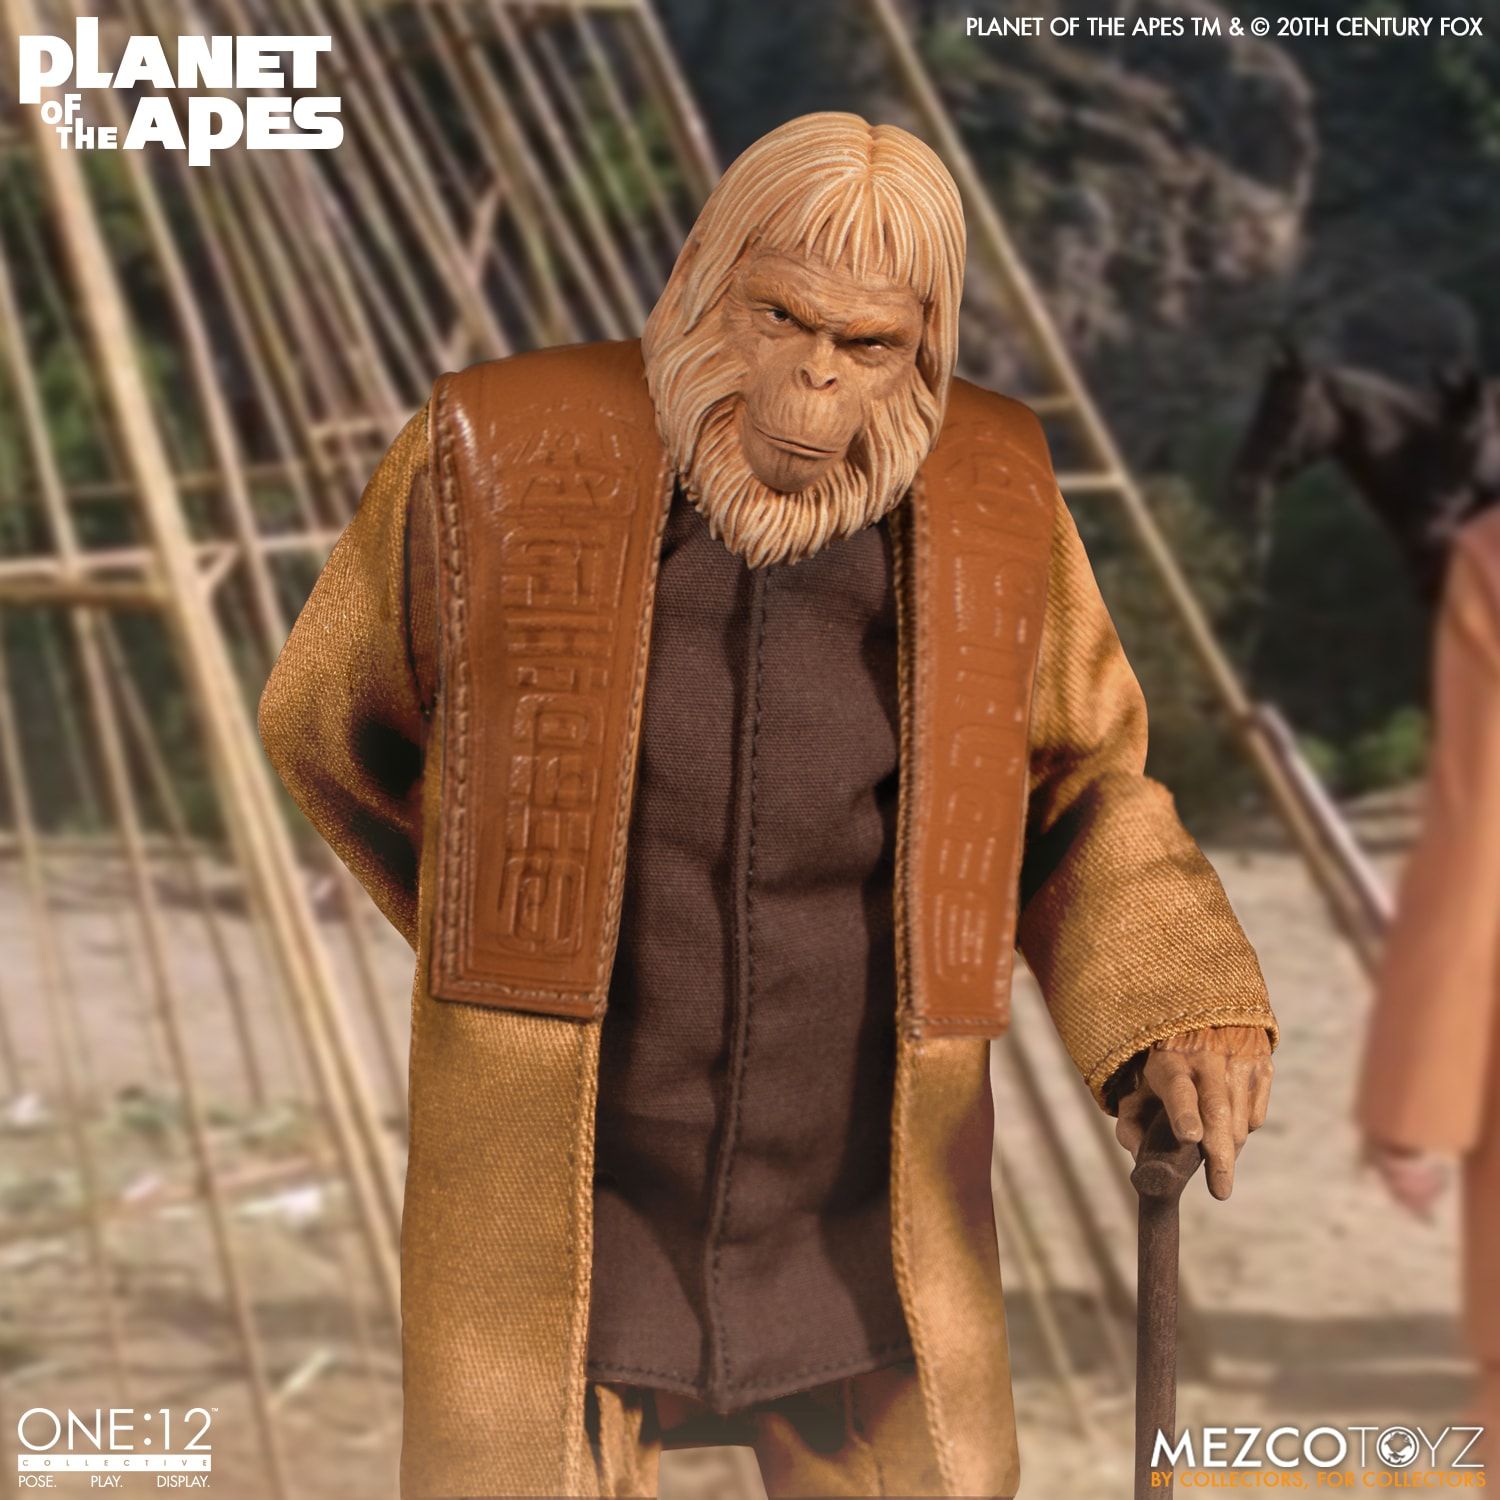 New Product: Mezco Planet of the Apes Dr. Zaius 8350